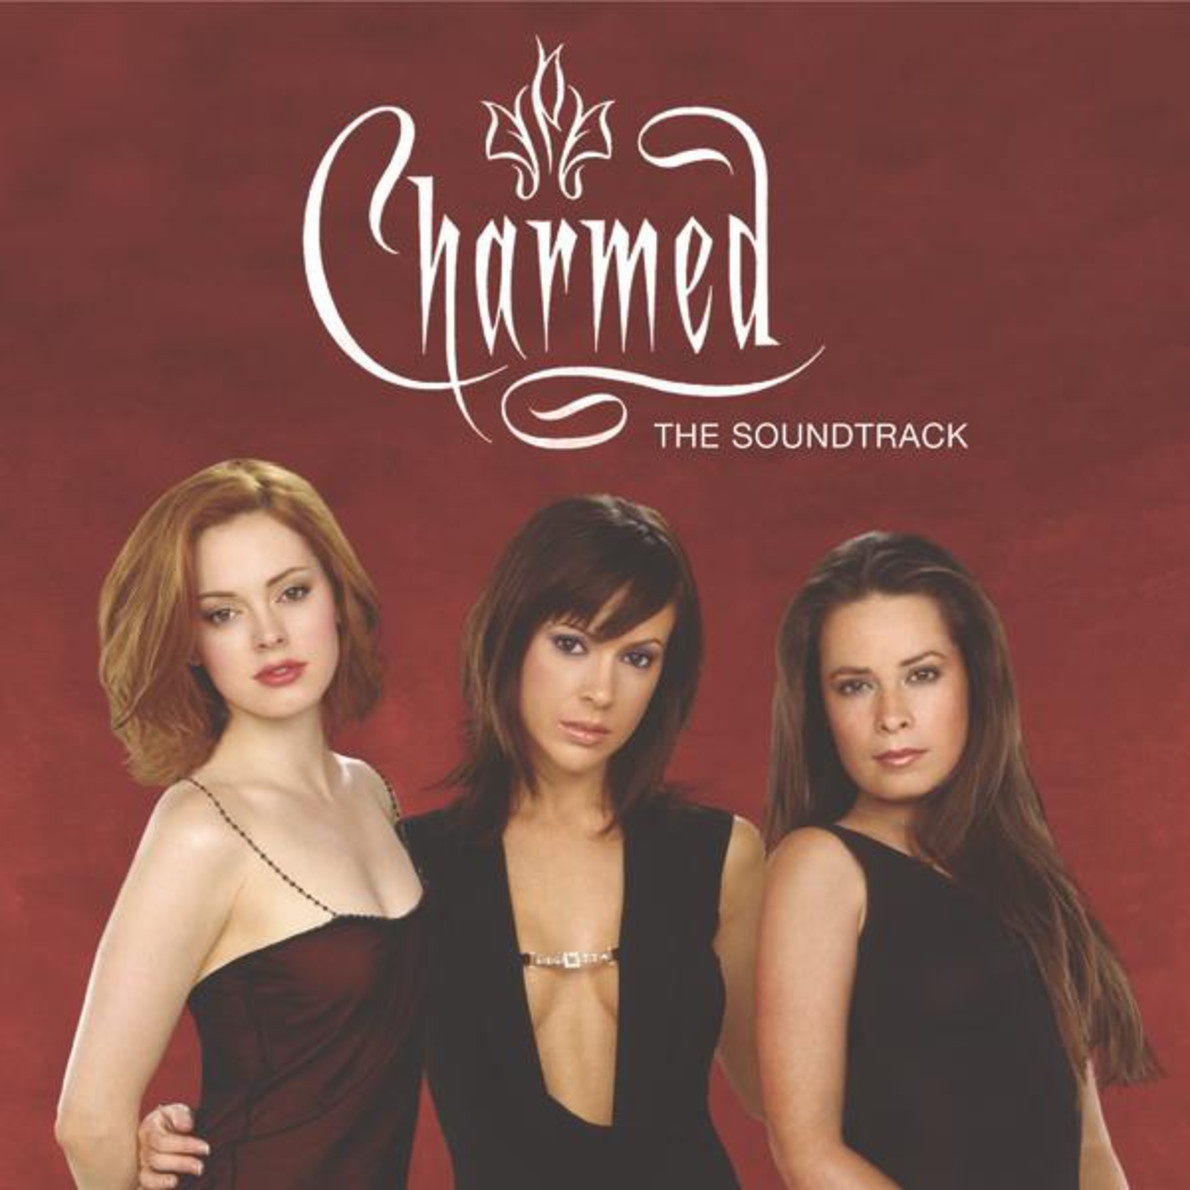 Charmed (The Soundtrack)